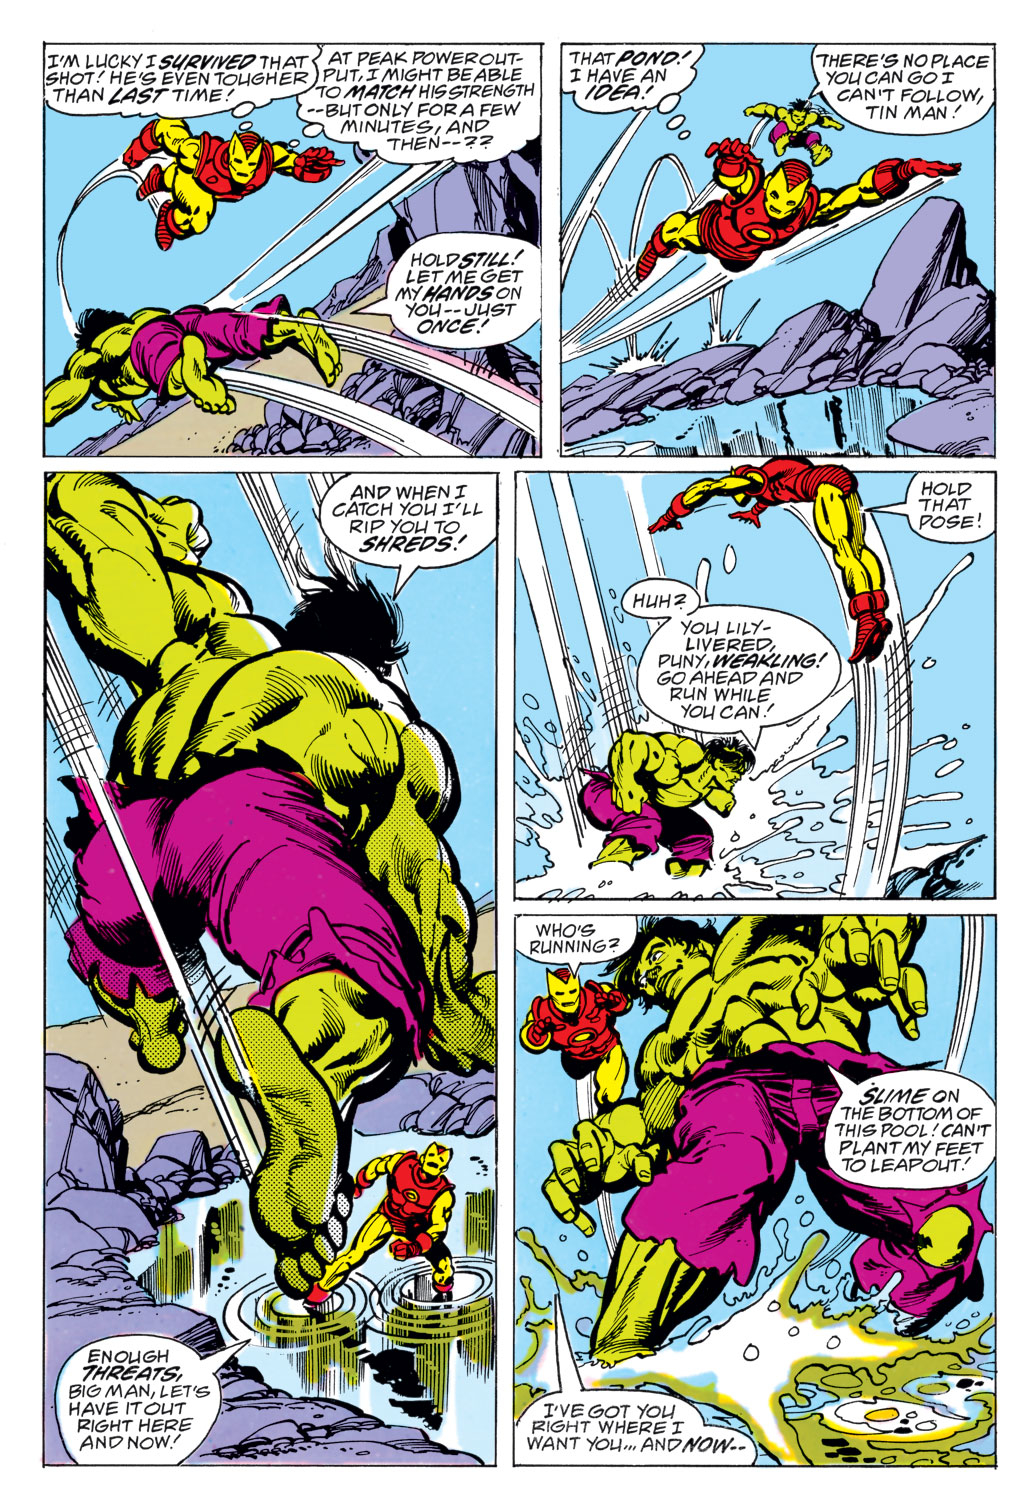 What If? (1977) issue 3 - The Avengers had never been - Page 19